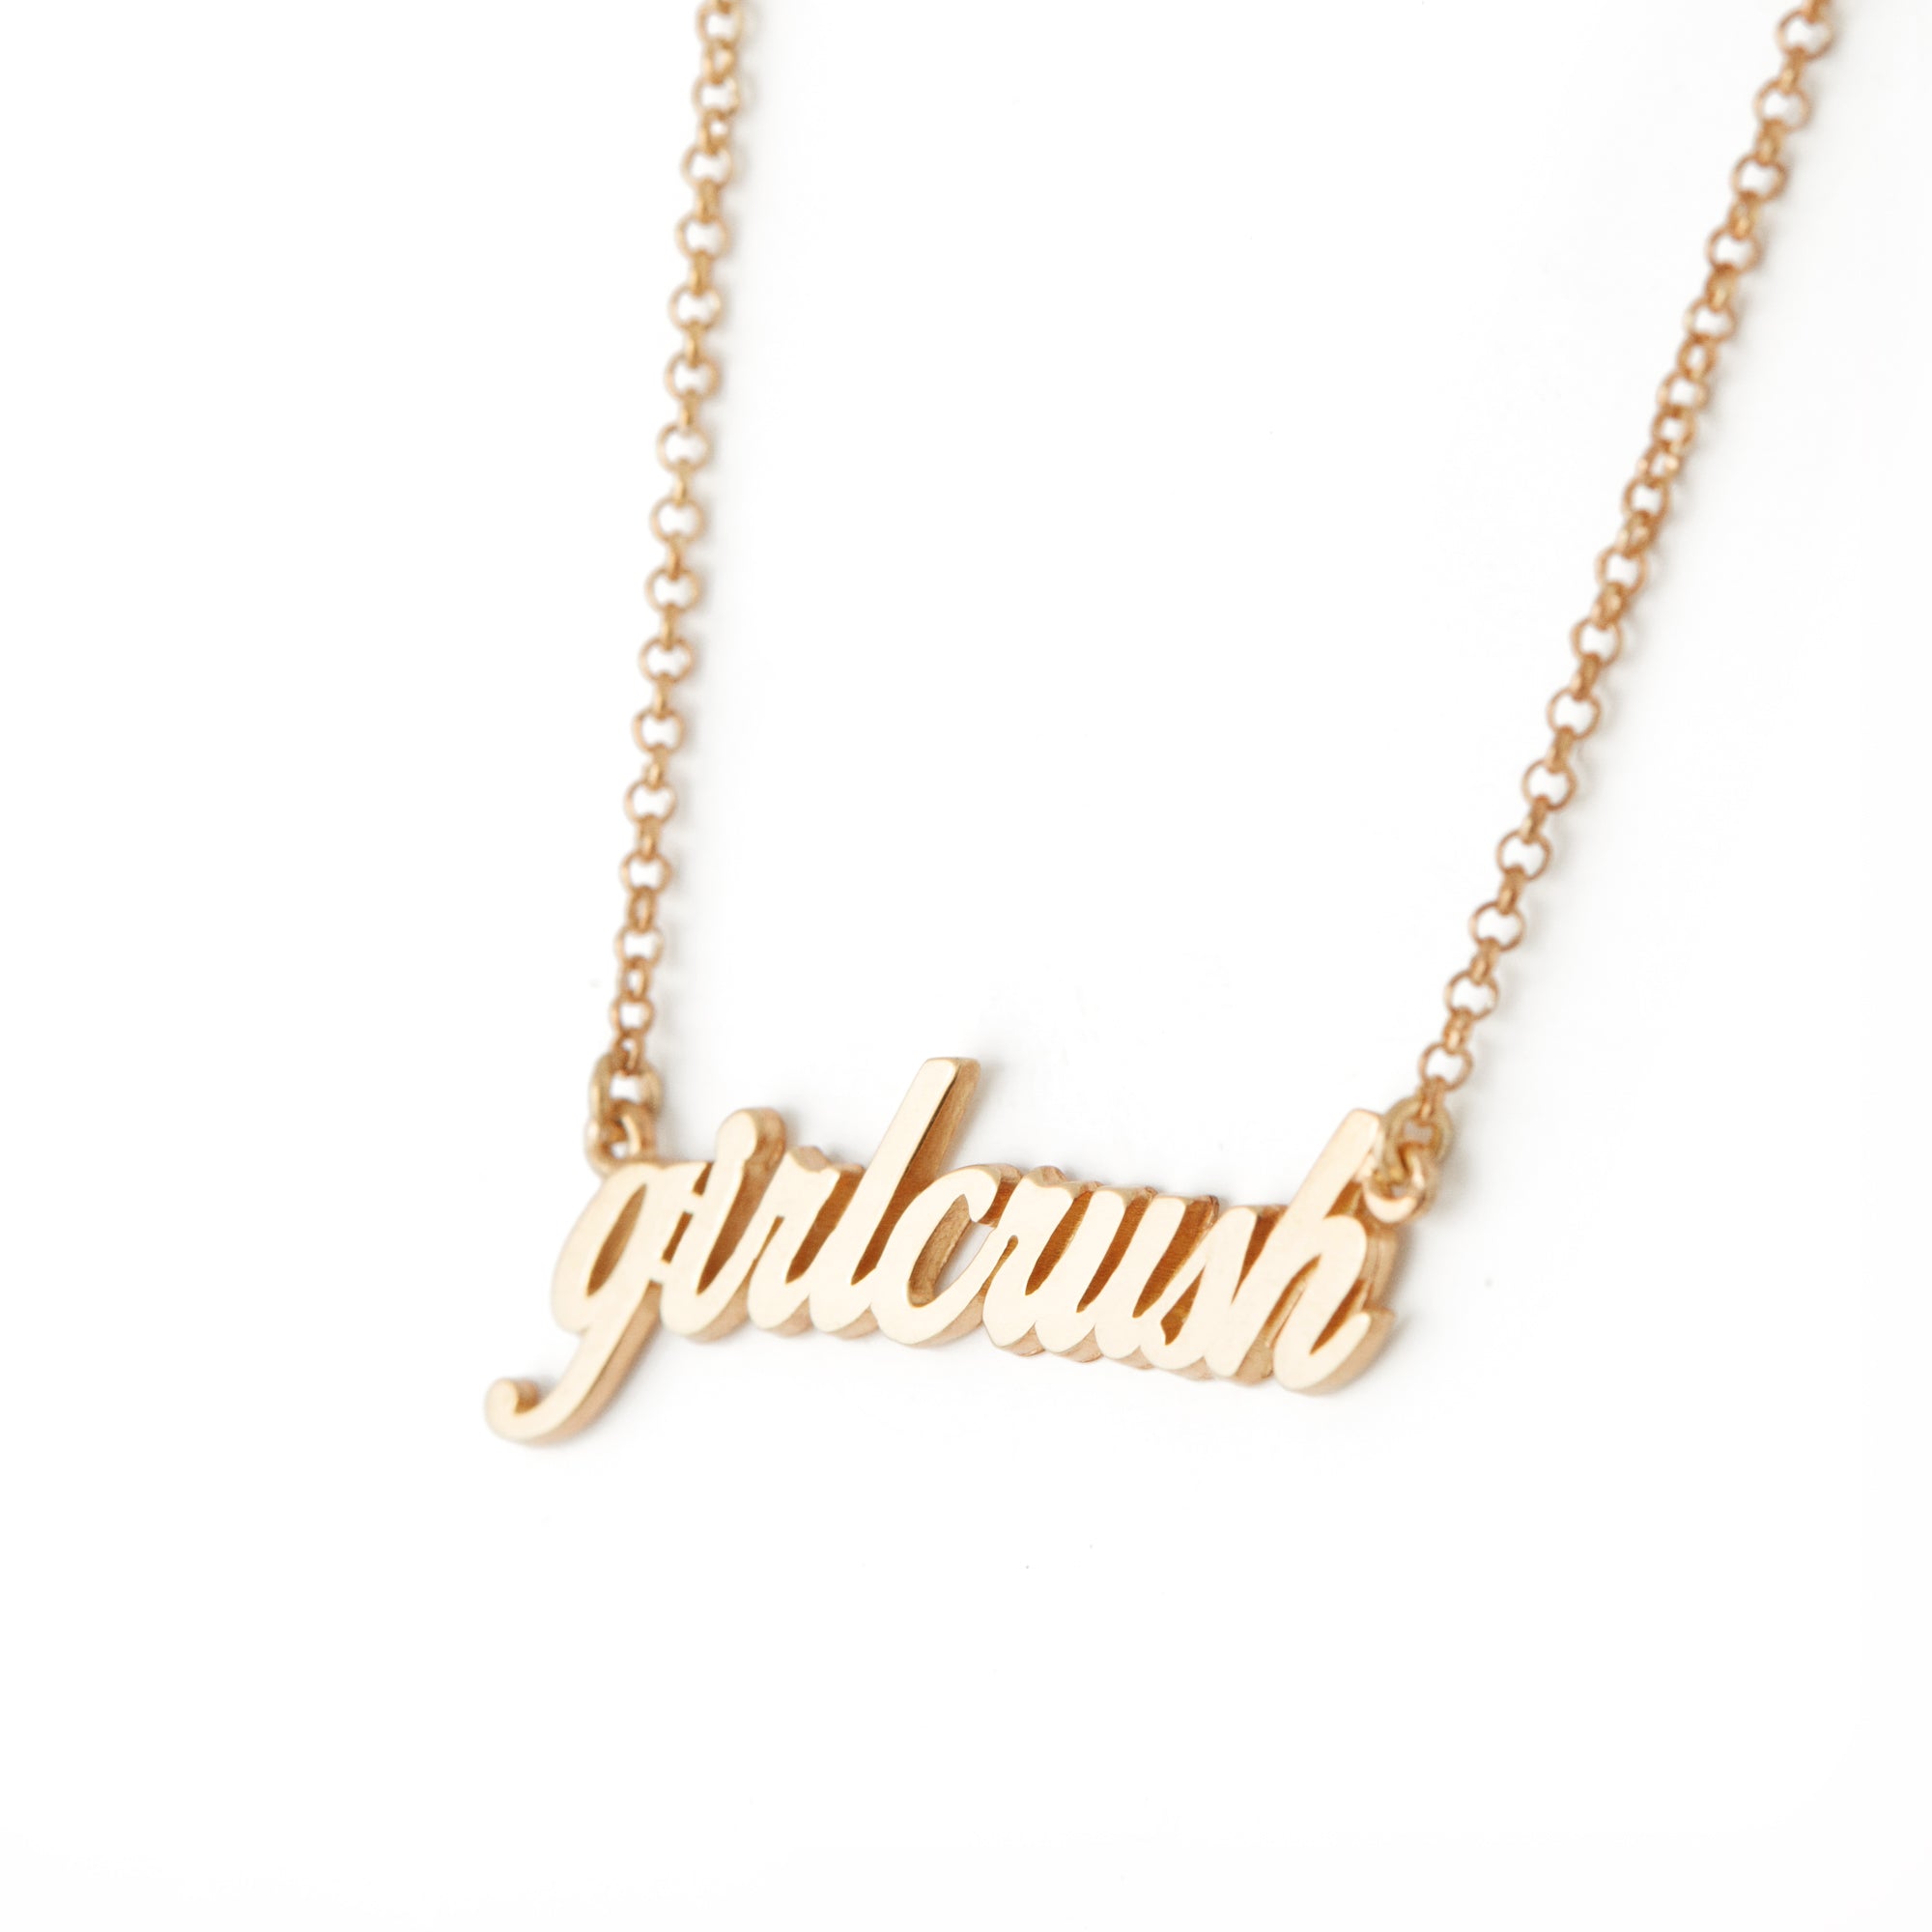 Girl Crush Necklace